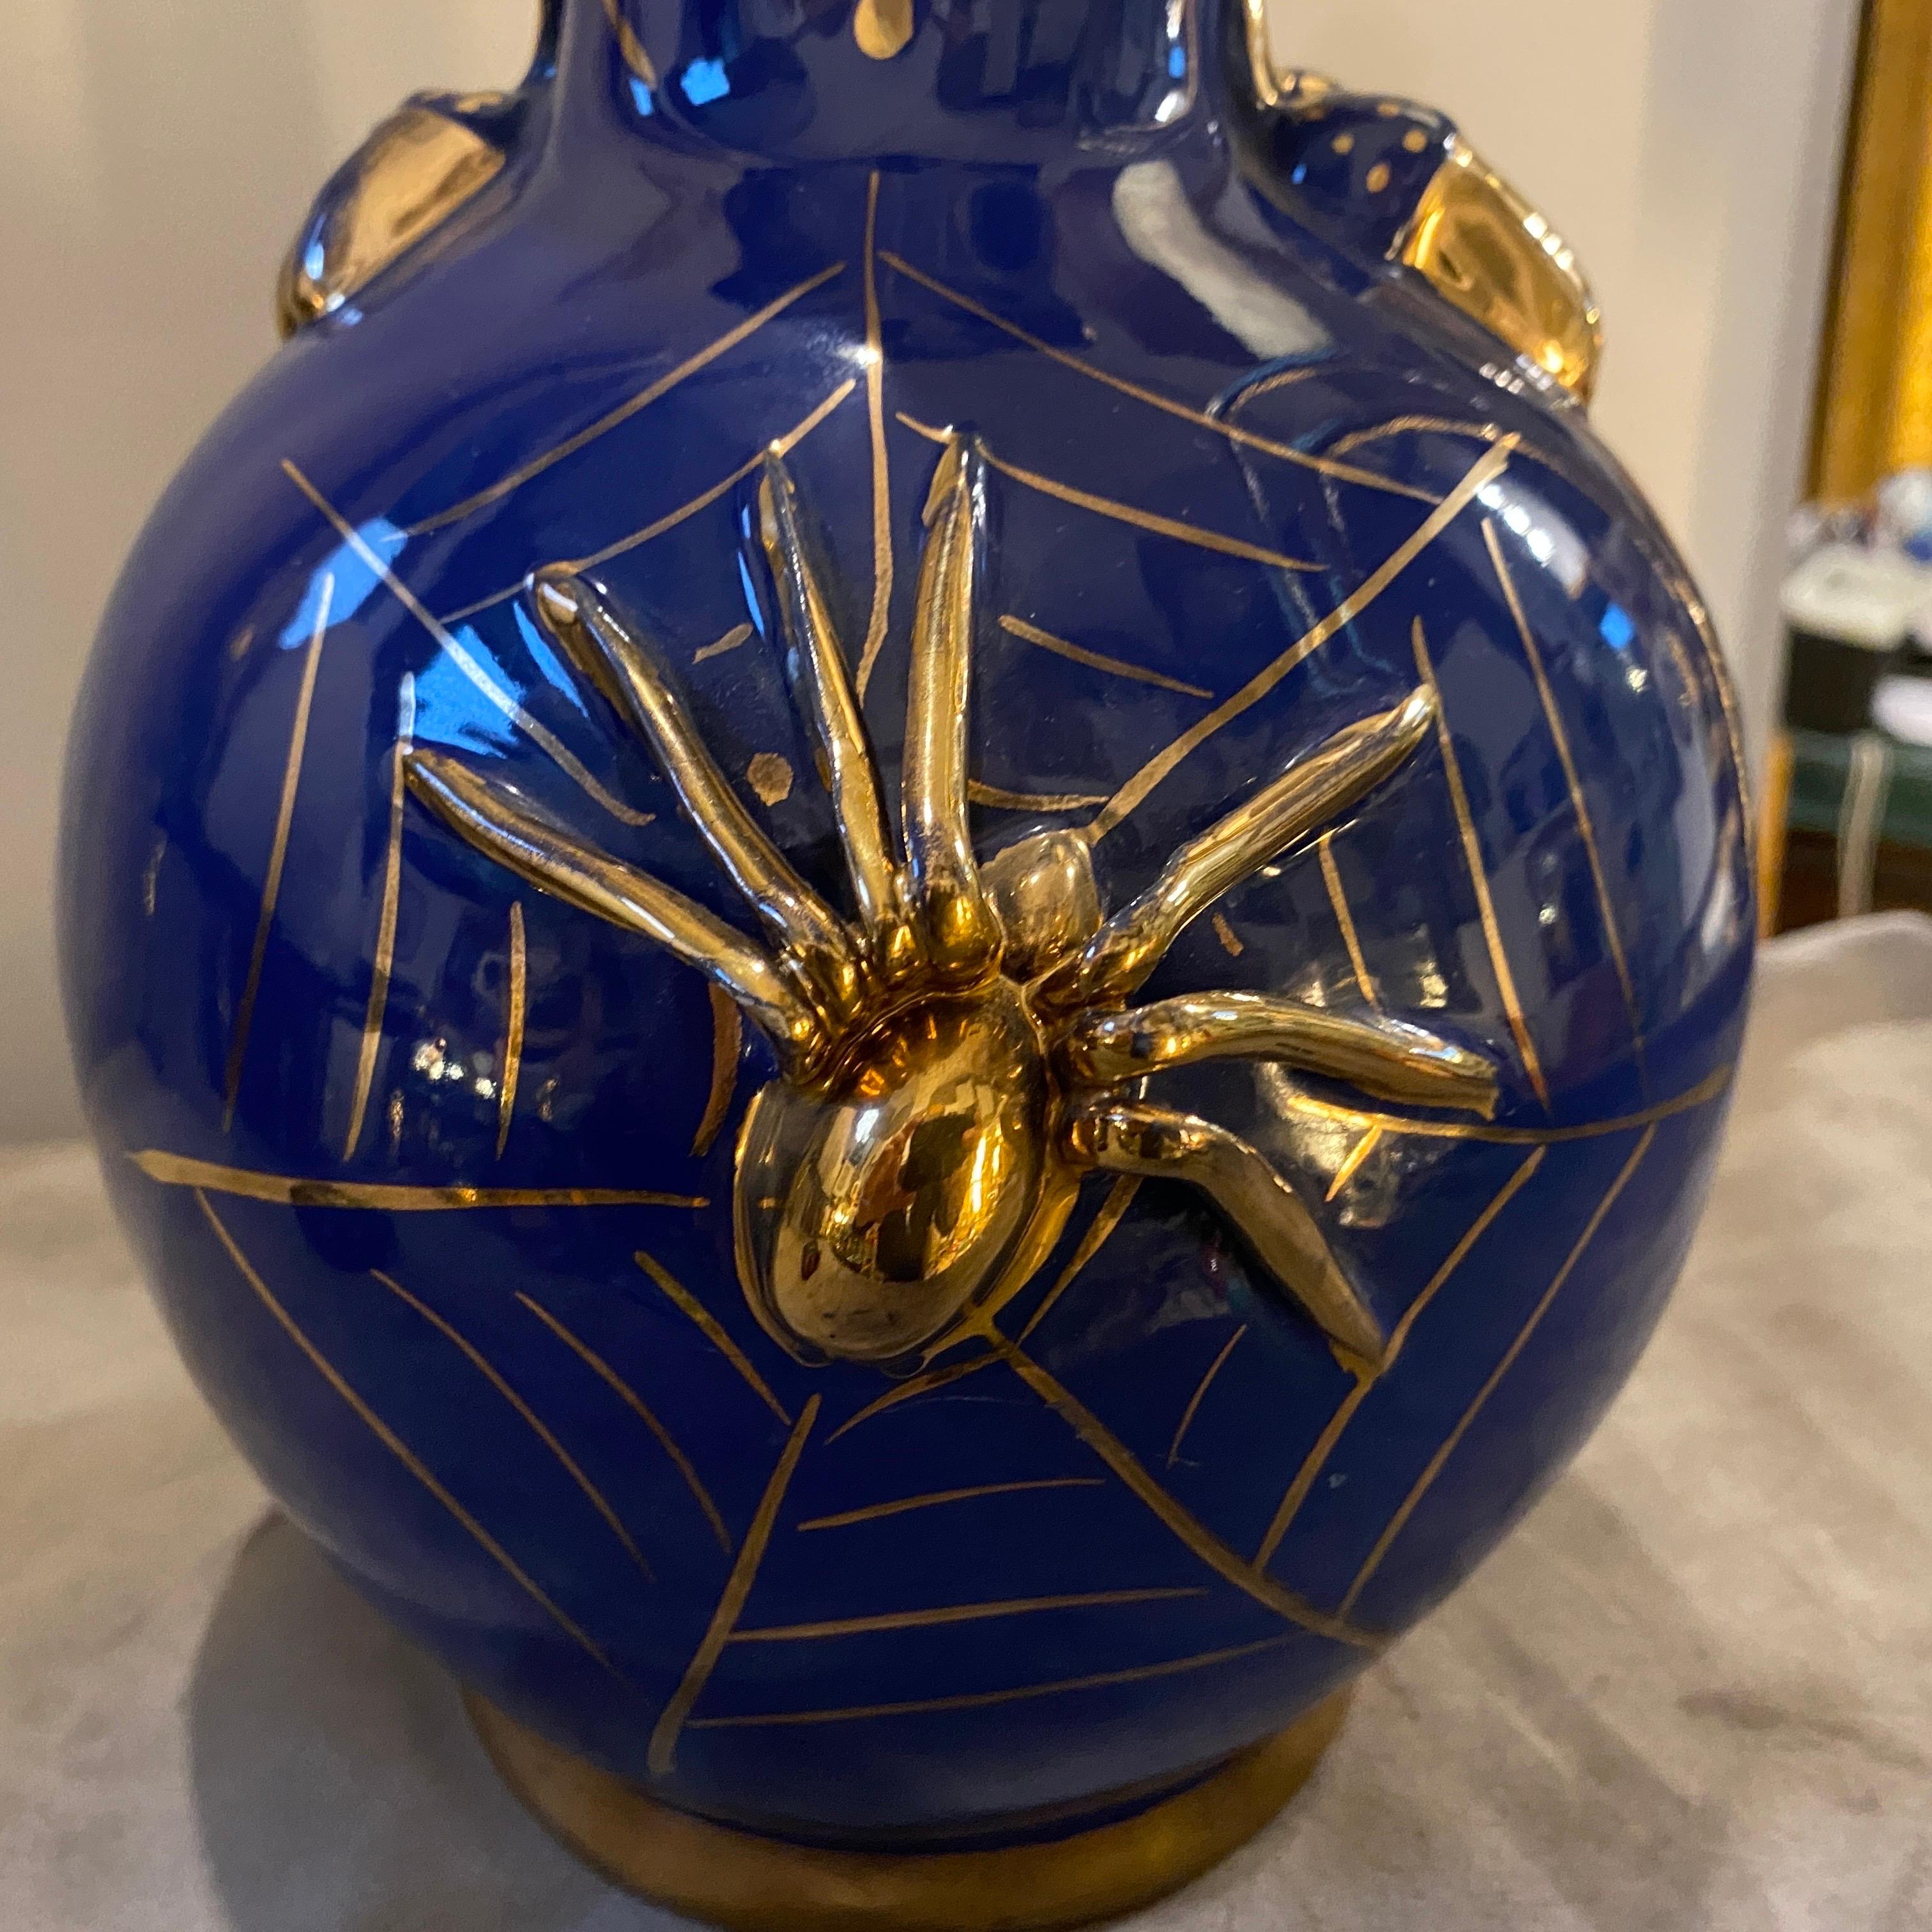 Hand-Painted 1960s Mid-Century Modern Blue and Gold Ceramic Italian Spider Vase